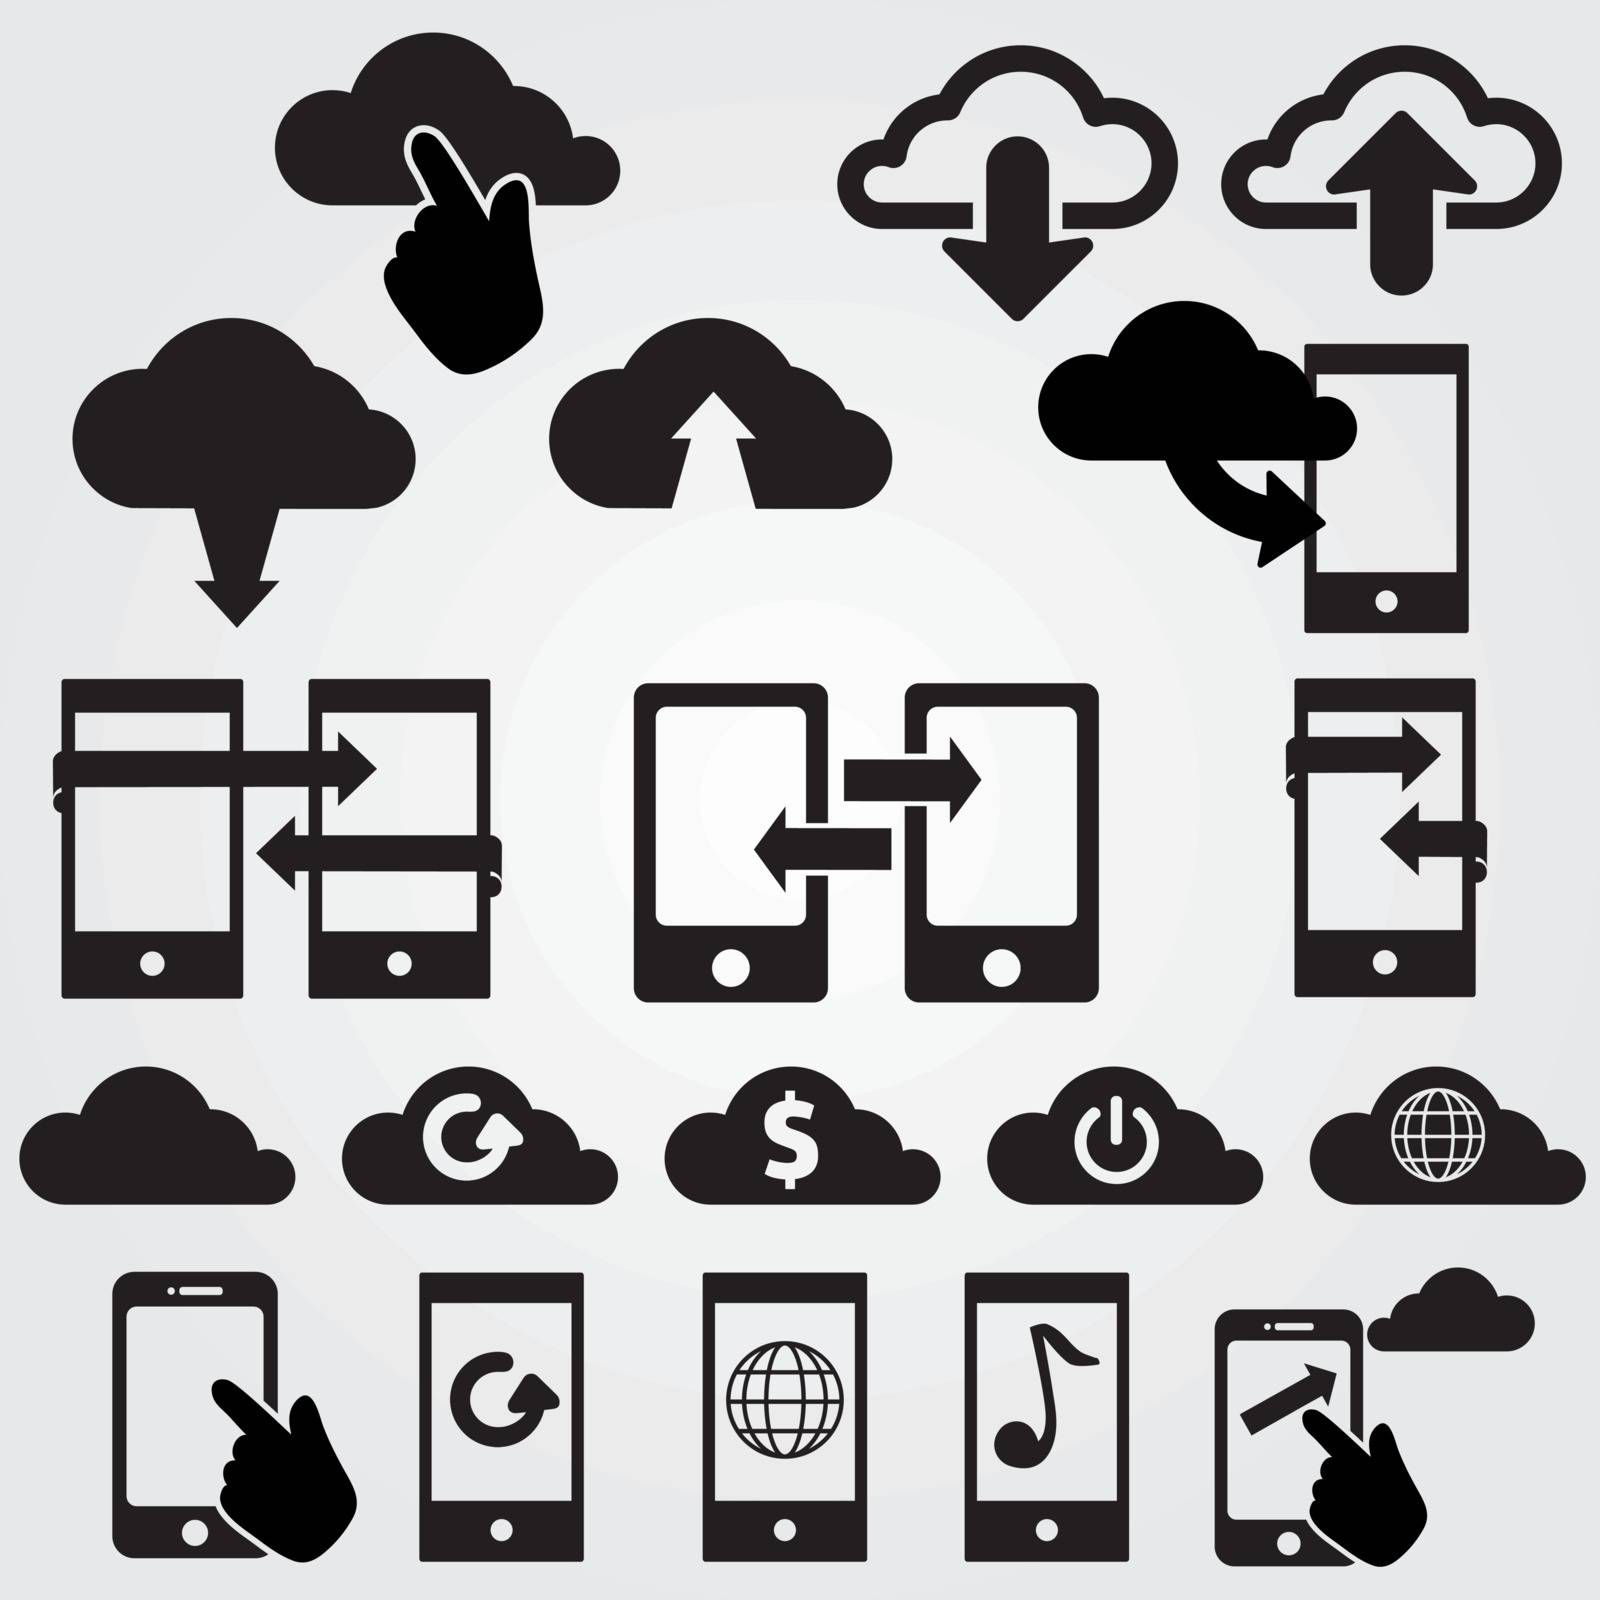 cloud app icon on mobile phone vector icons set by alvaroc